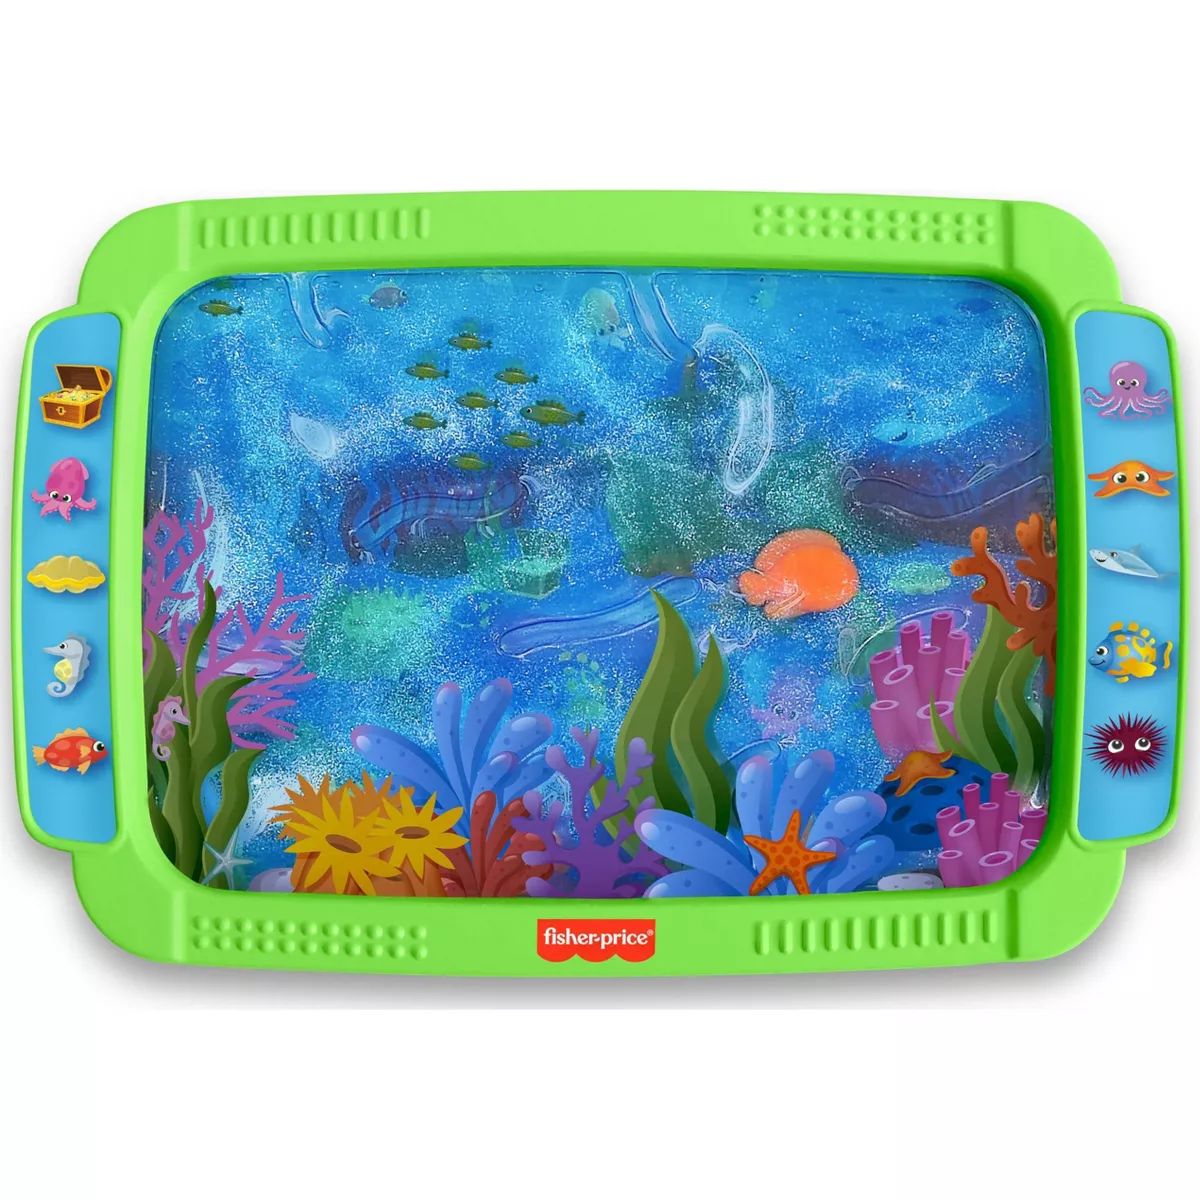 Fisher-Price Sensory Bright Squish Scape Tablet | Target